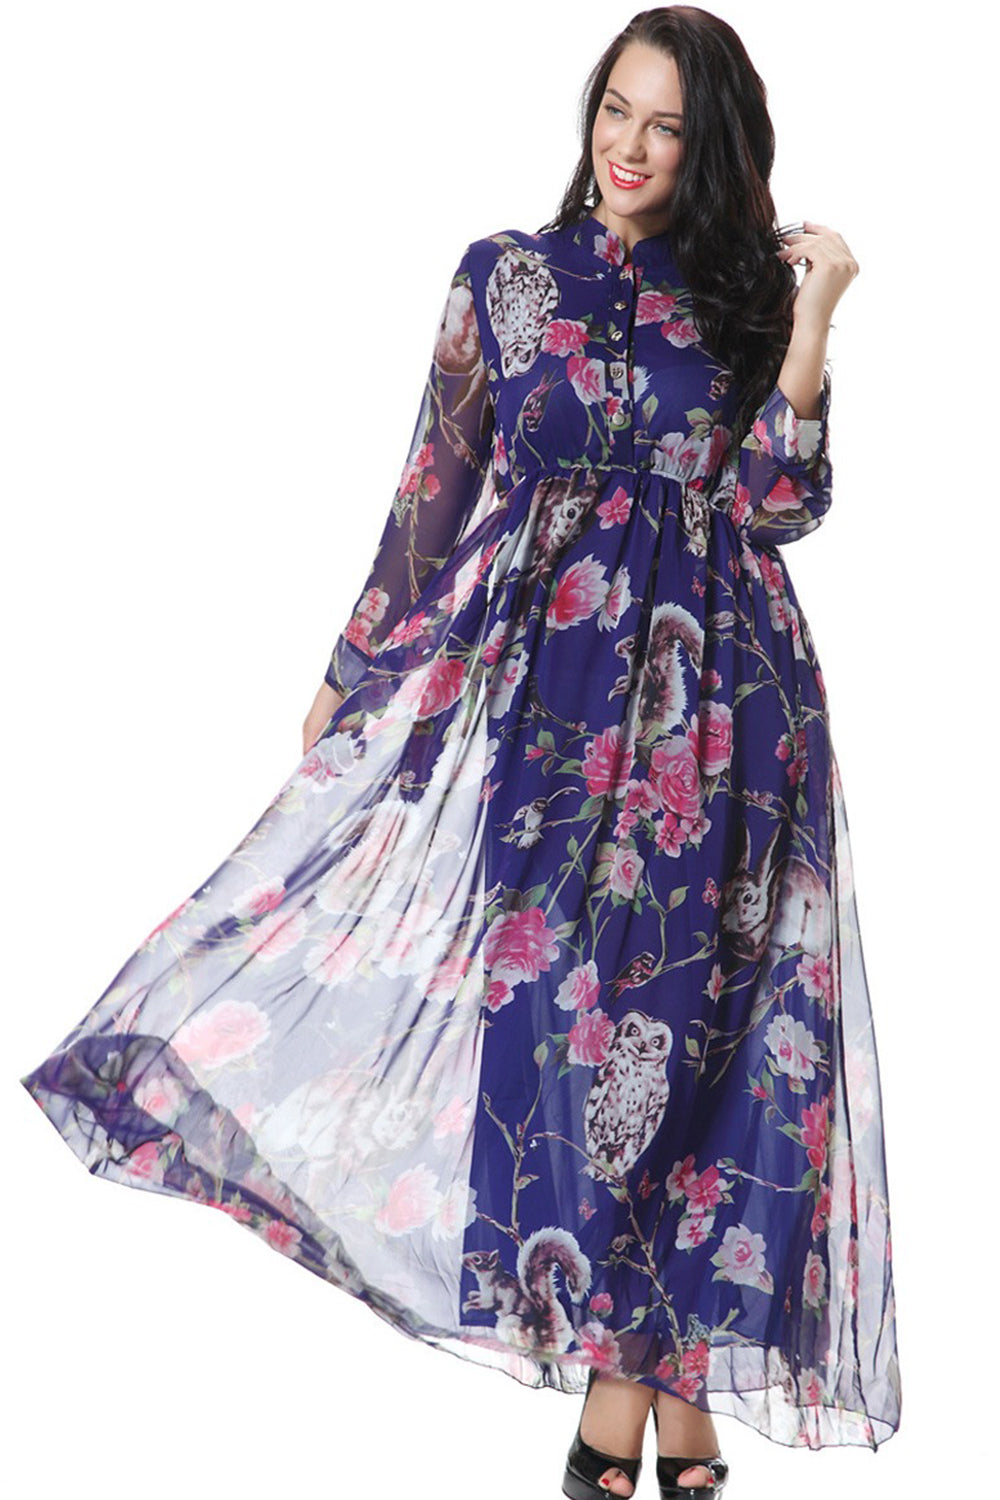 Ketty More Women Plus Size Collar Neck Floral Printed Decorated Maxi Dress-KMWD401